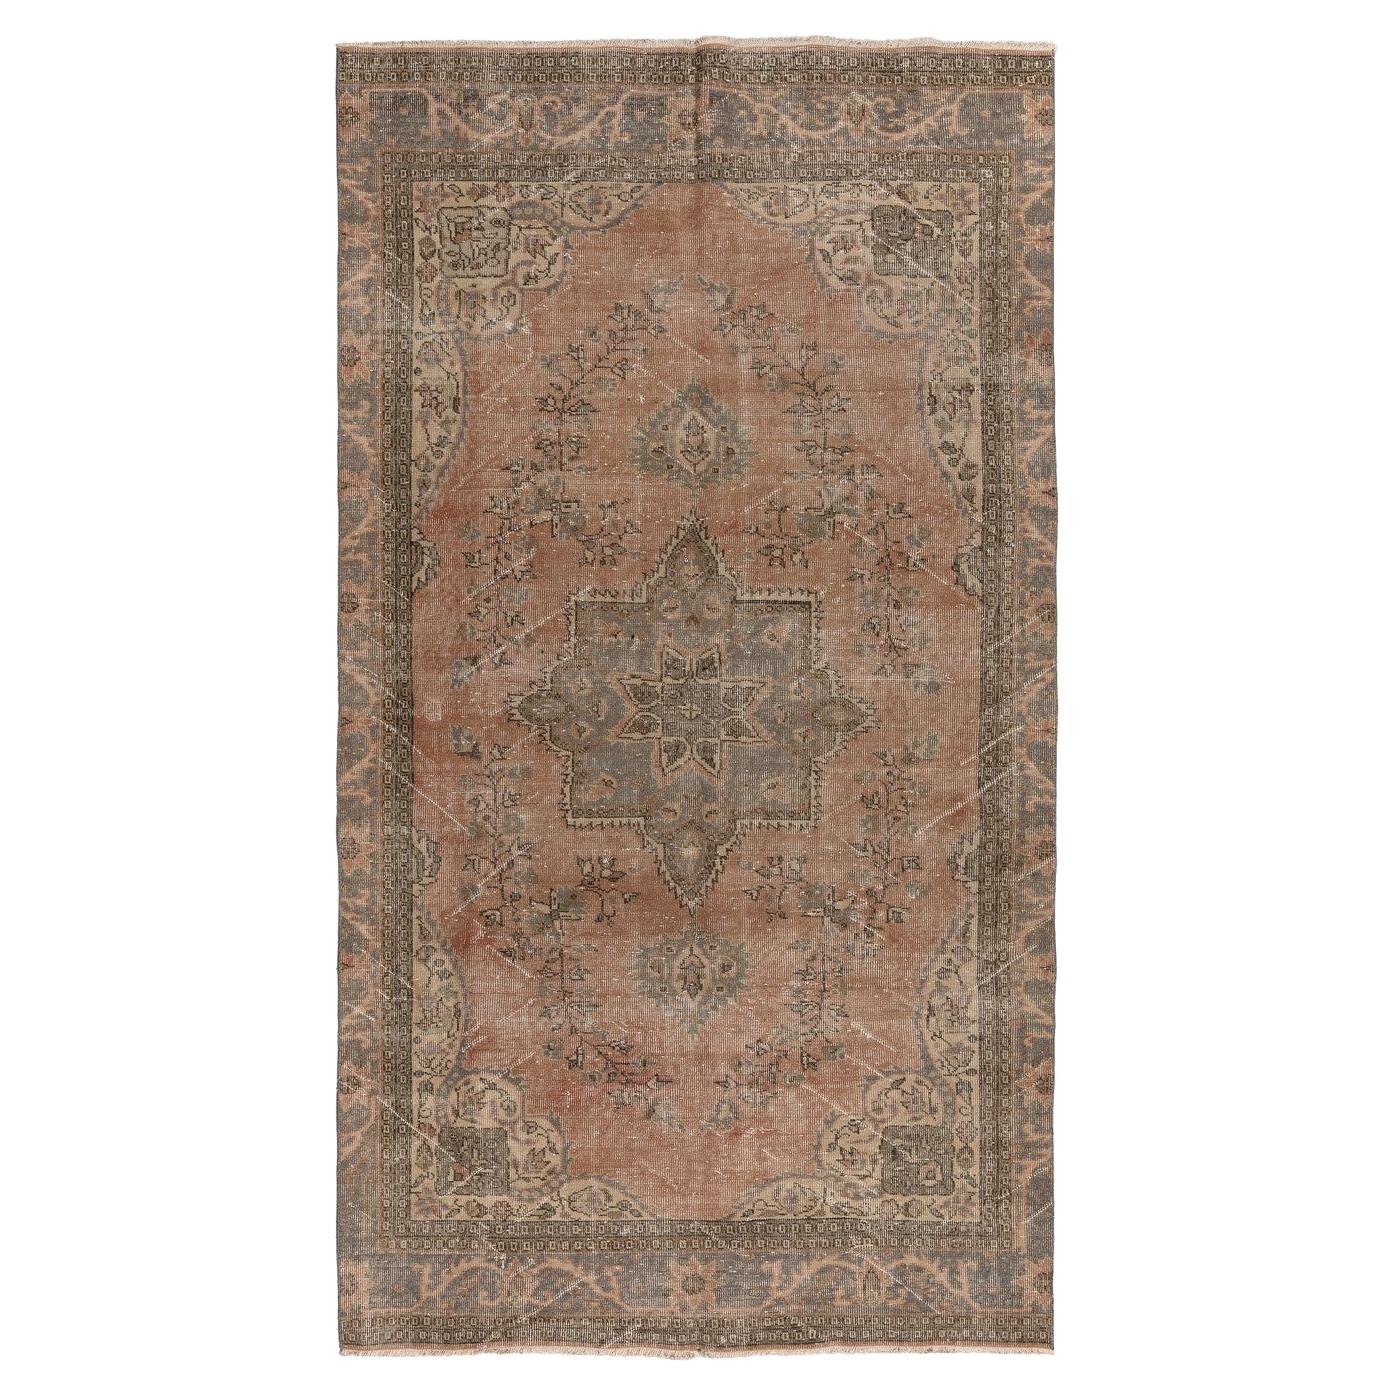 5.5x9.6 Ft One-of-a-Kind Hand-Knotted Distressed Vintage Turkish Area Rug